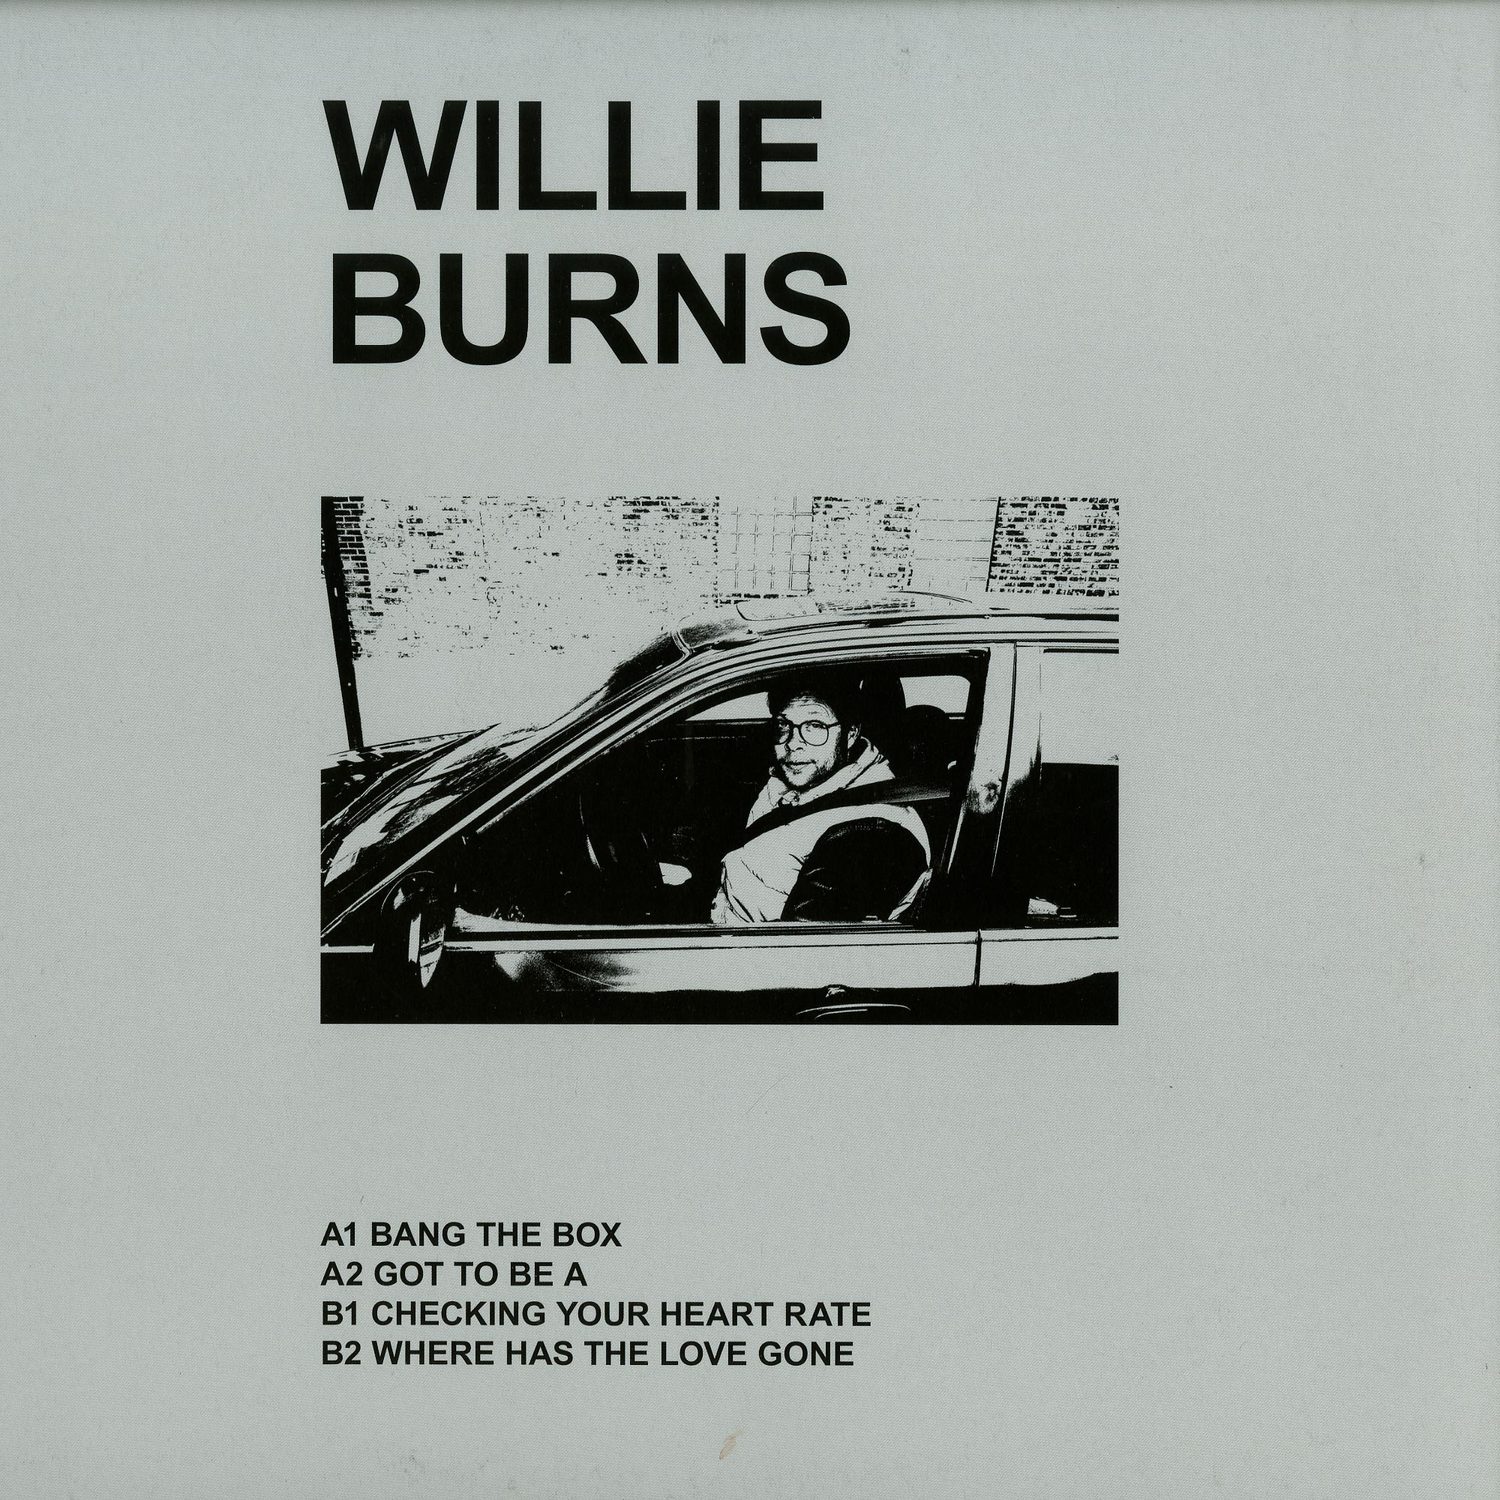 Willie Burns - WHERE HAS THE LOVE GONE